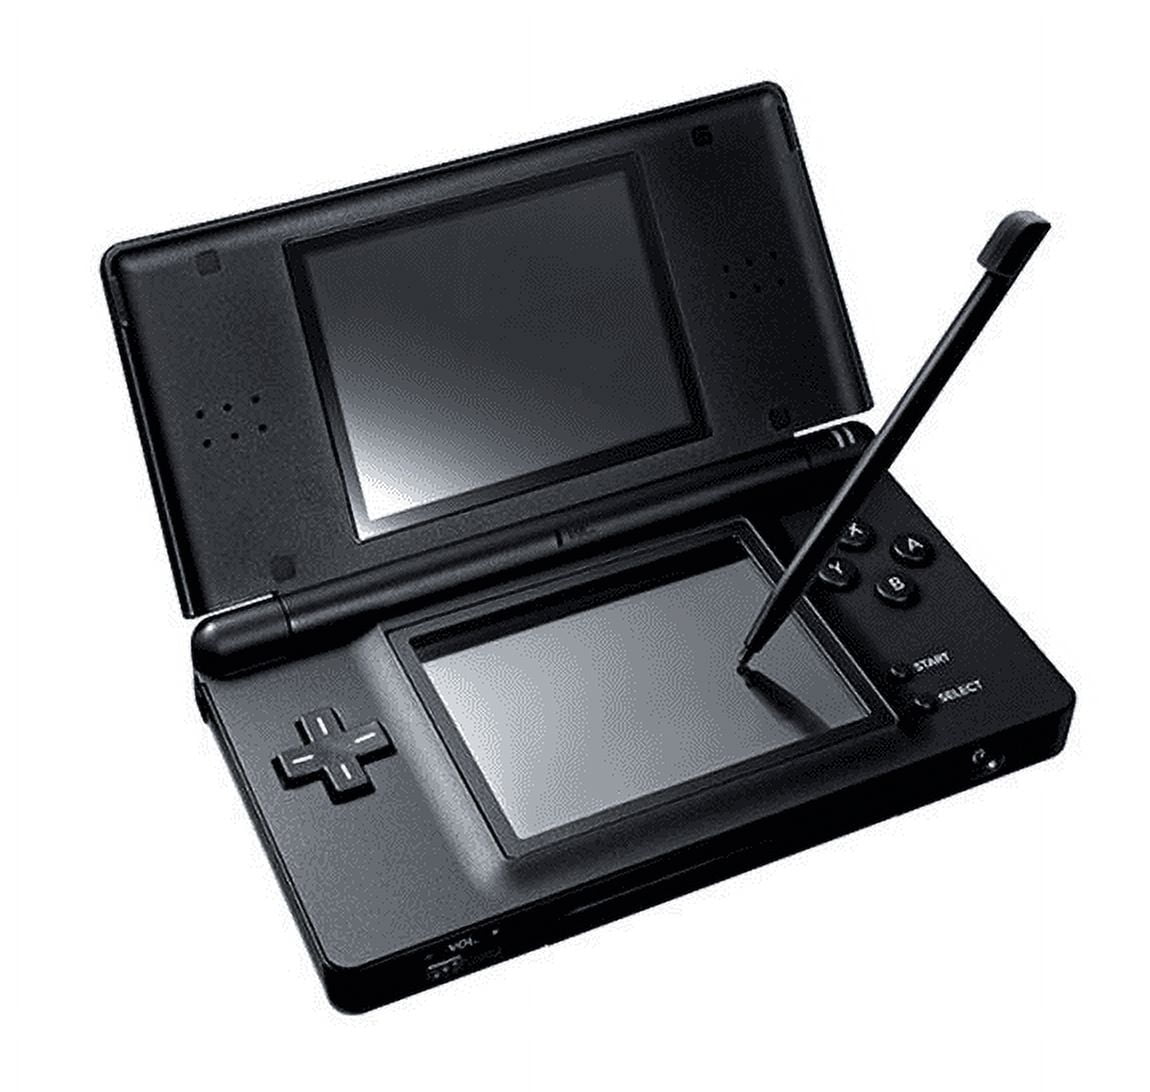 Authentic Nintendo DS Lite Jet Black with Stylus and Charger - 100